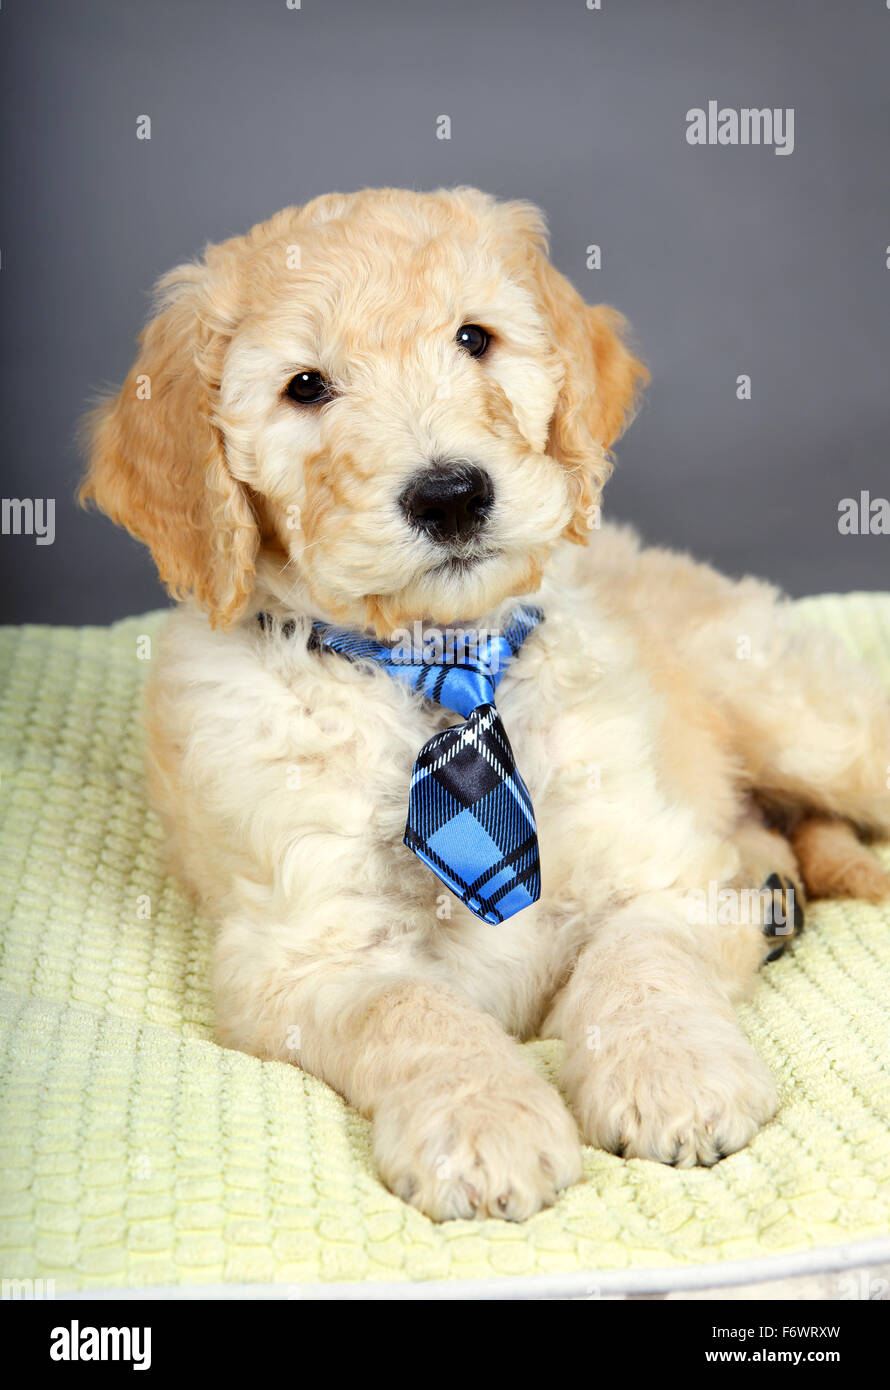 Cute goldendoodle puppy with plaid tie Stock Photo